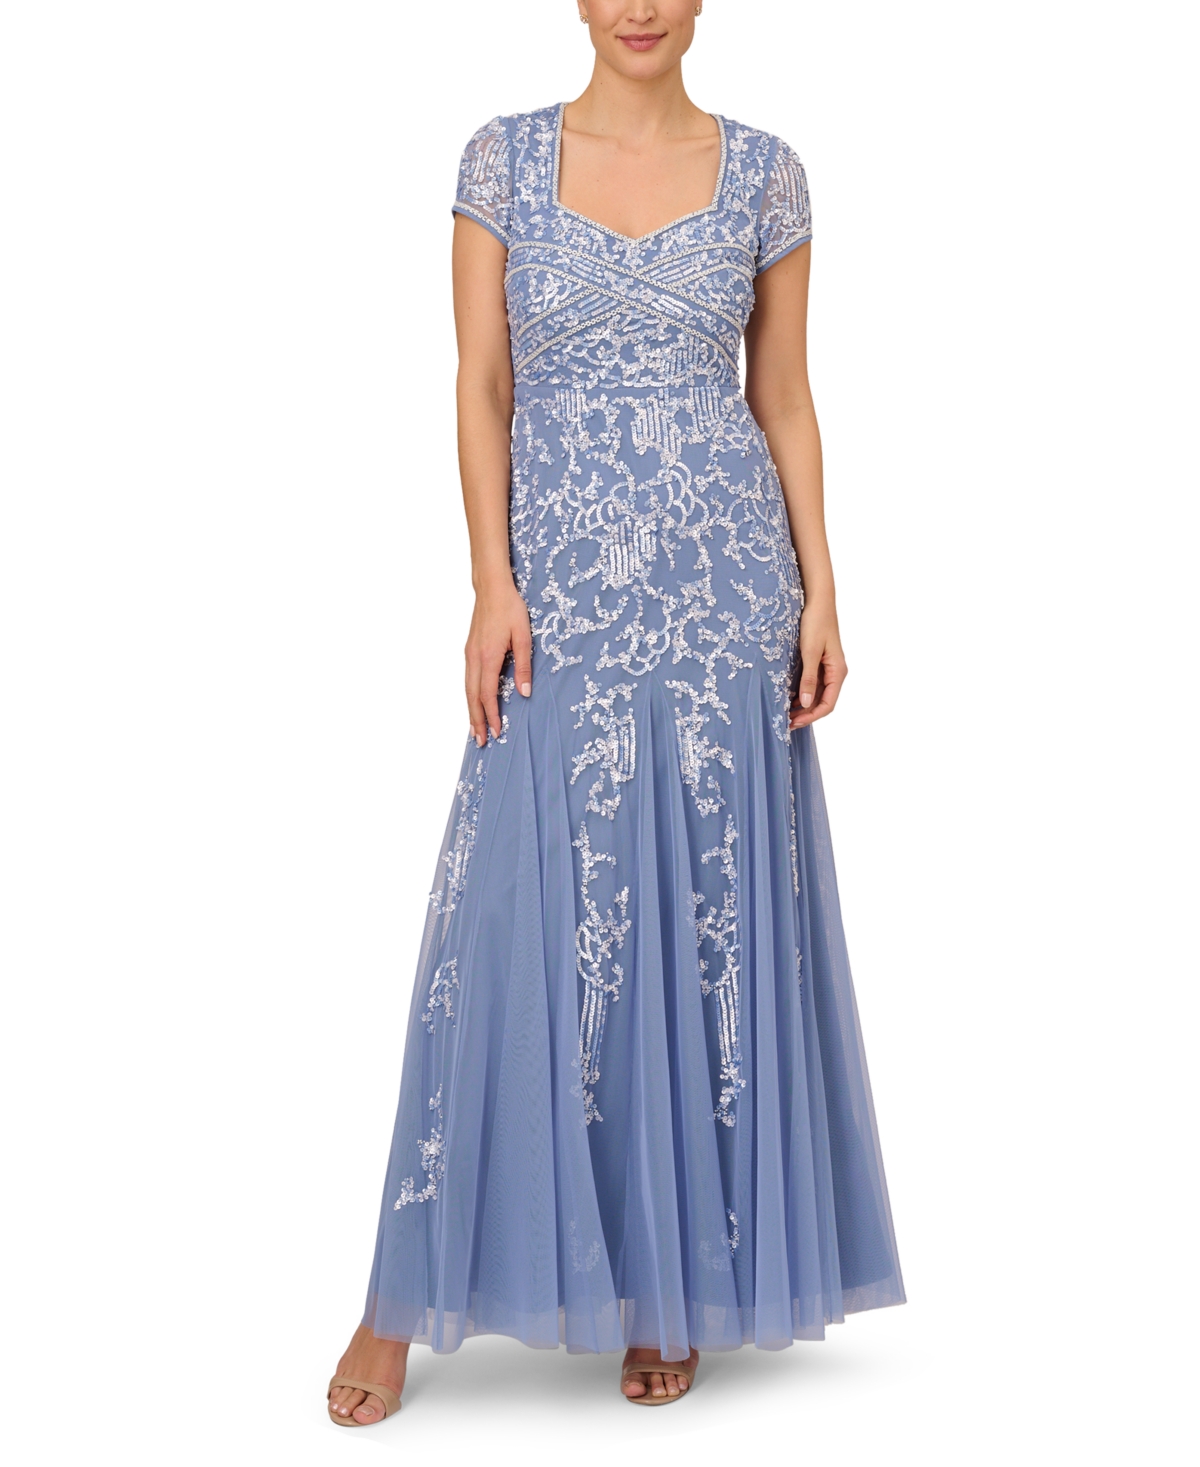 Great Gatsby Dress – Great Gatsby Dresses for Sale Adrianna Papell Embellished Godet Gown - French Blue $349.00 AT vintagedancer.com